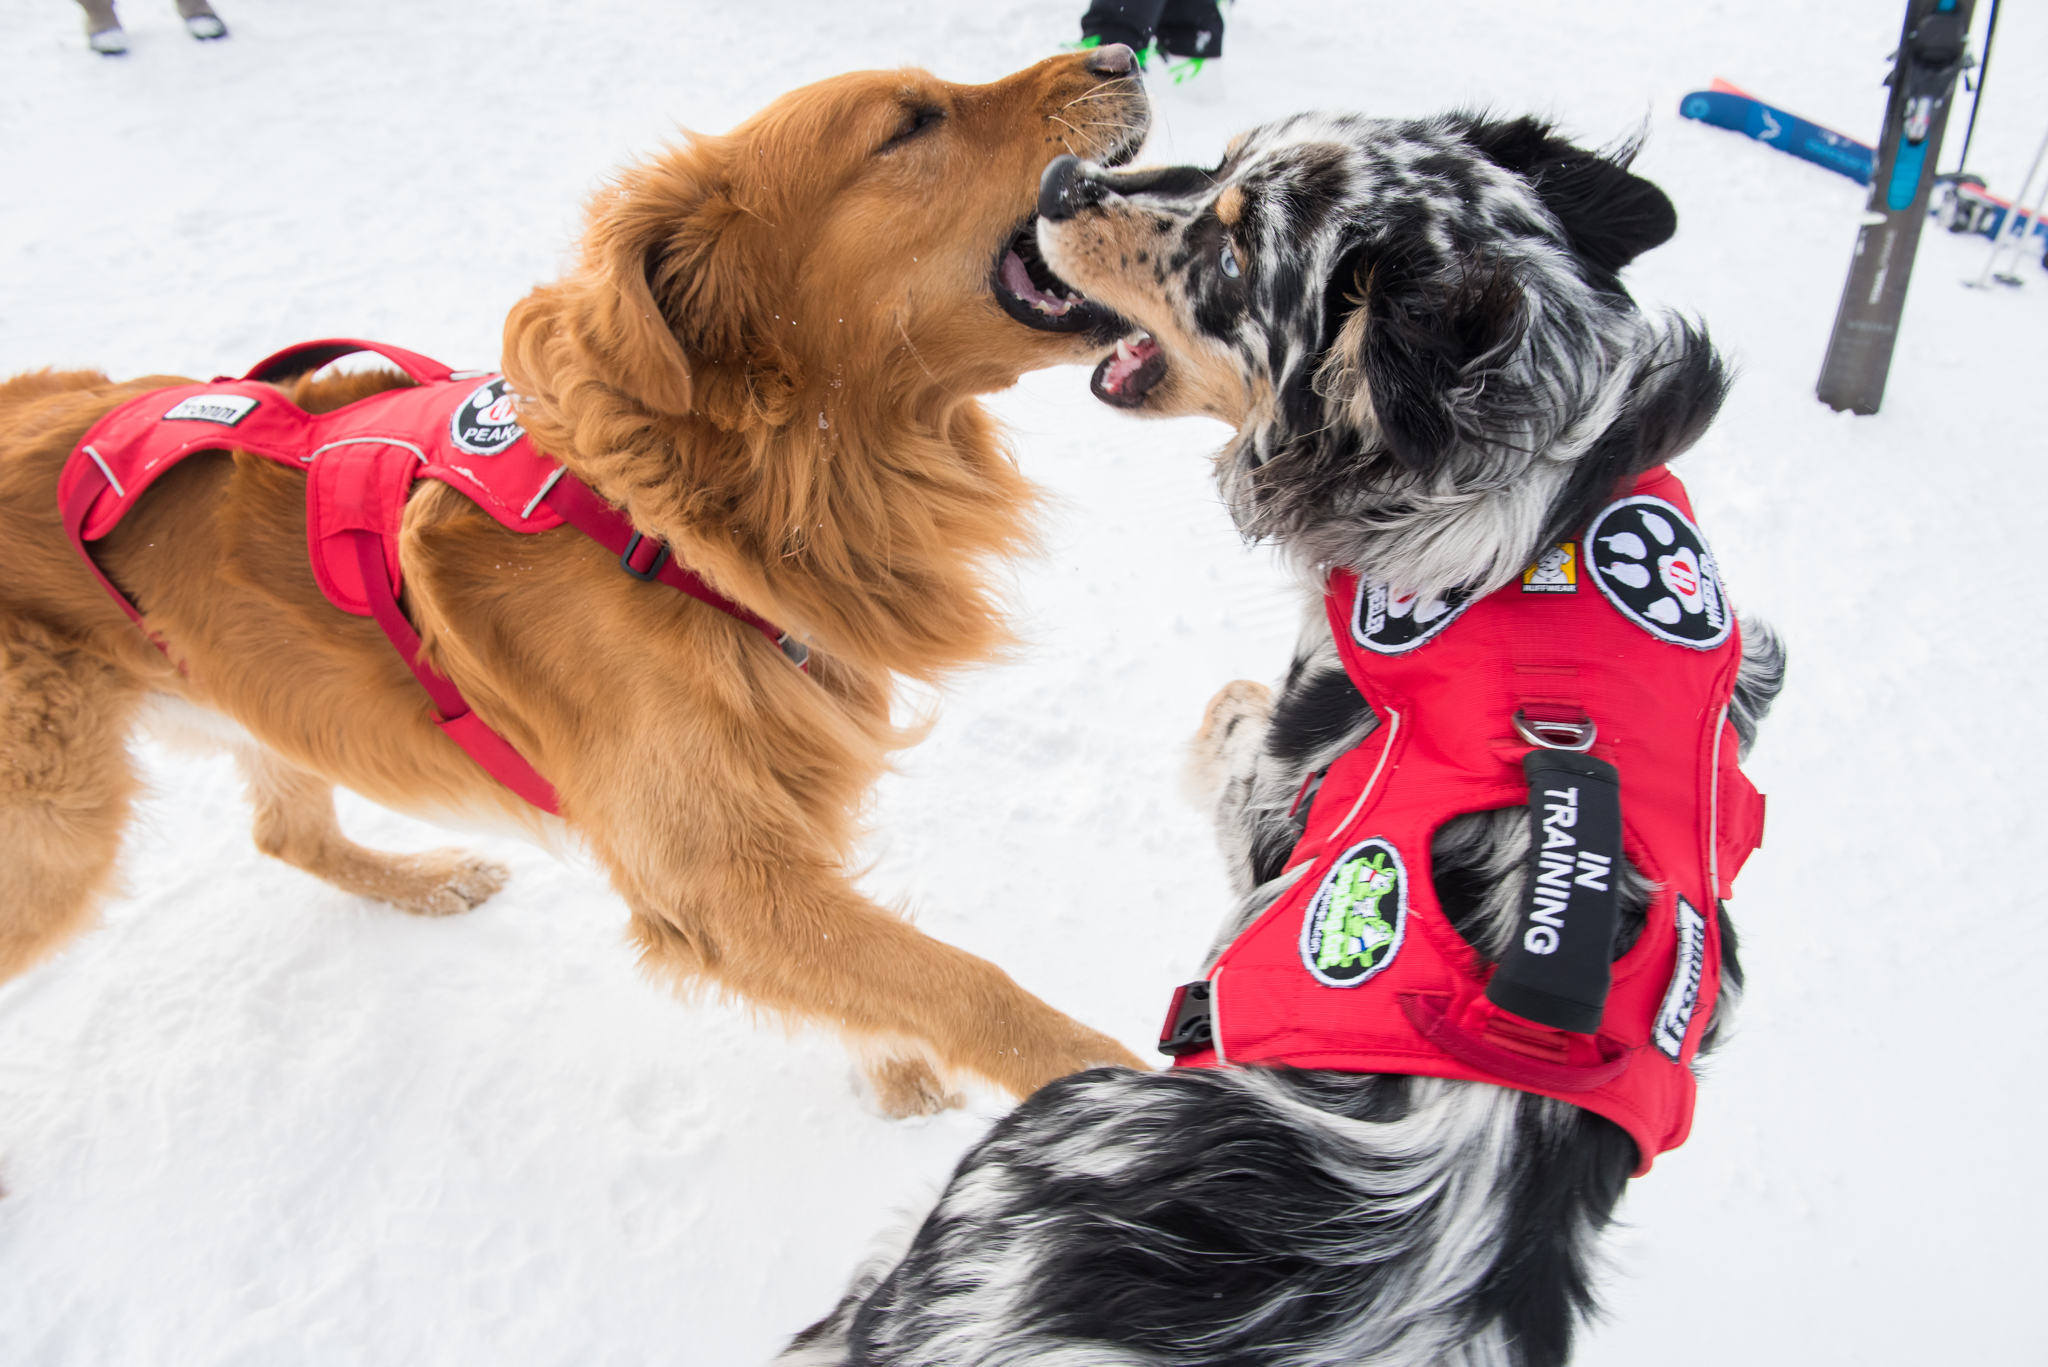 Avalanche, Dog, Avalanche Step In Dog Harness